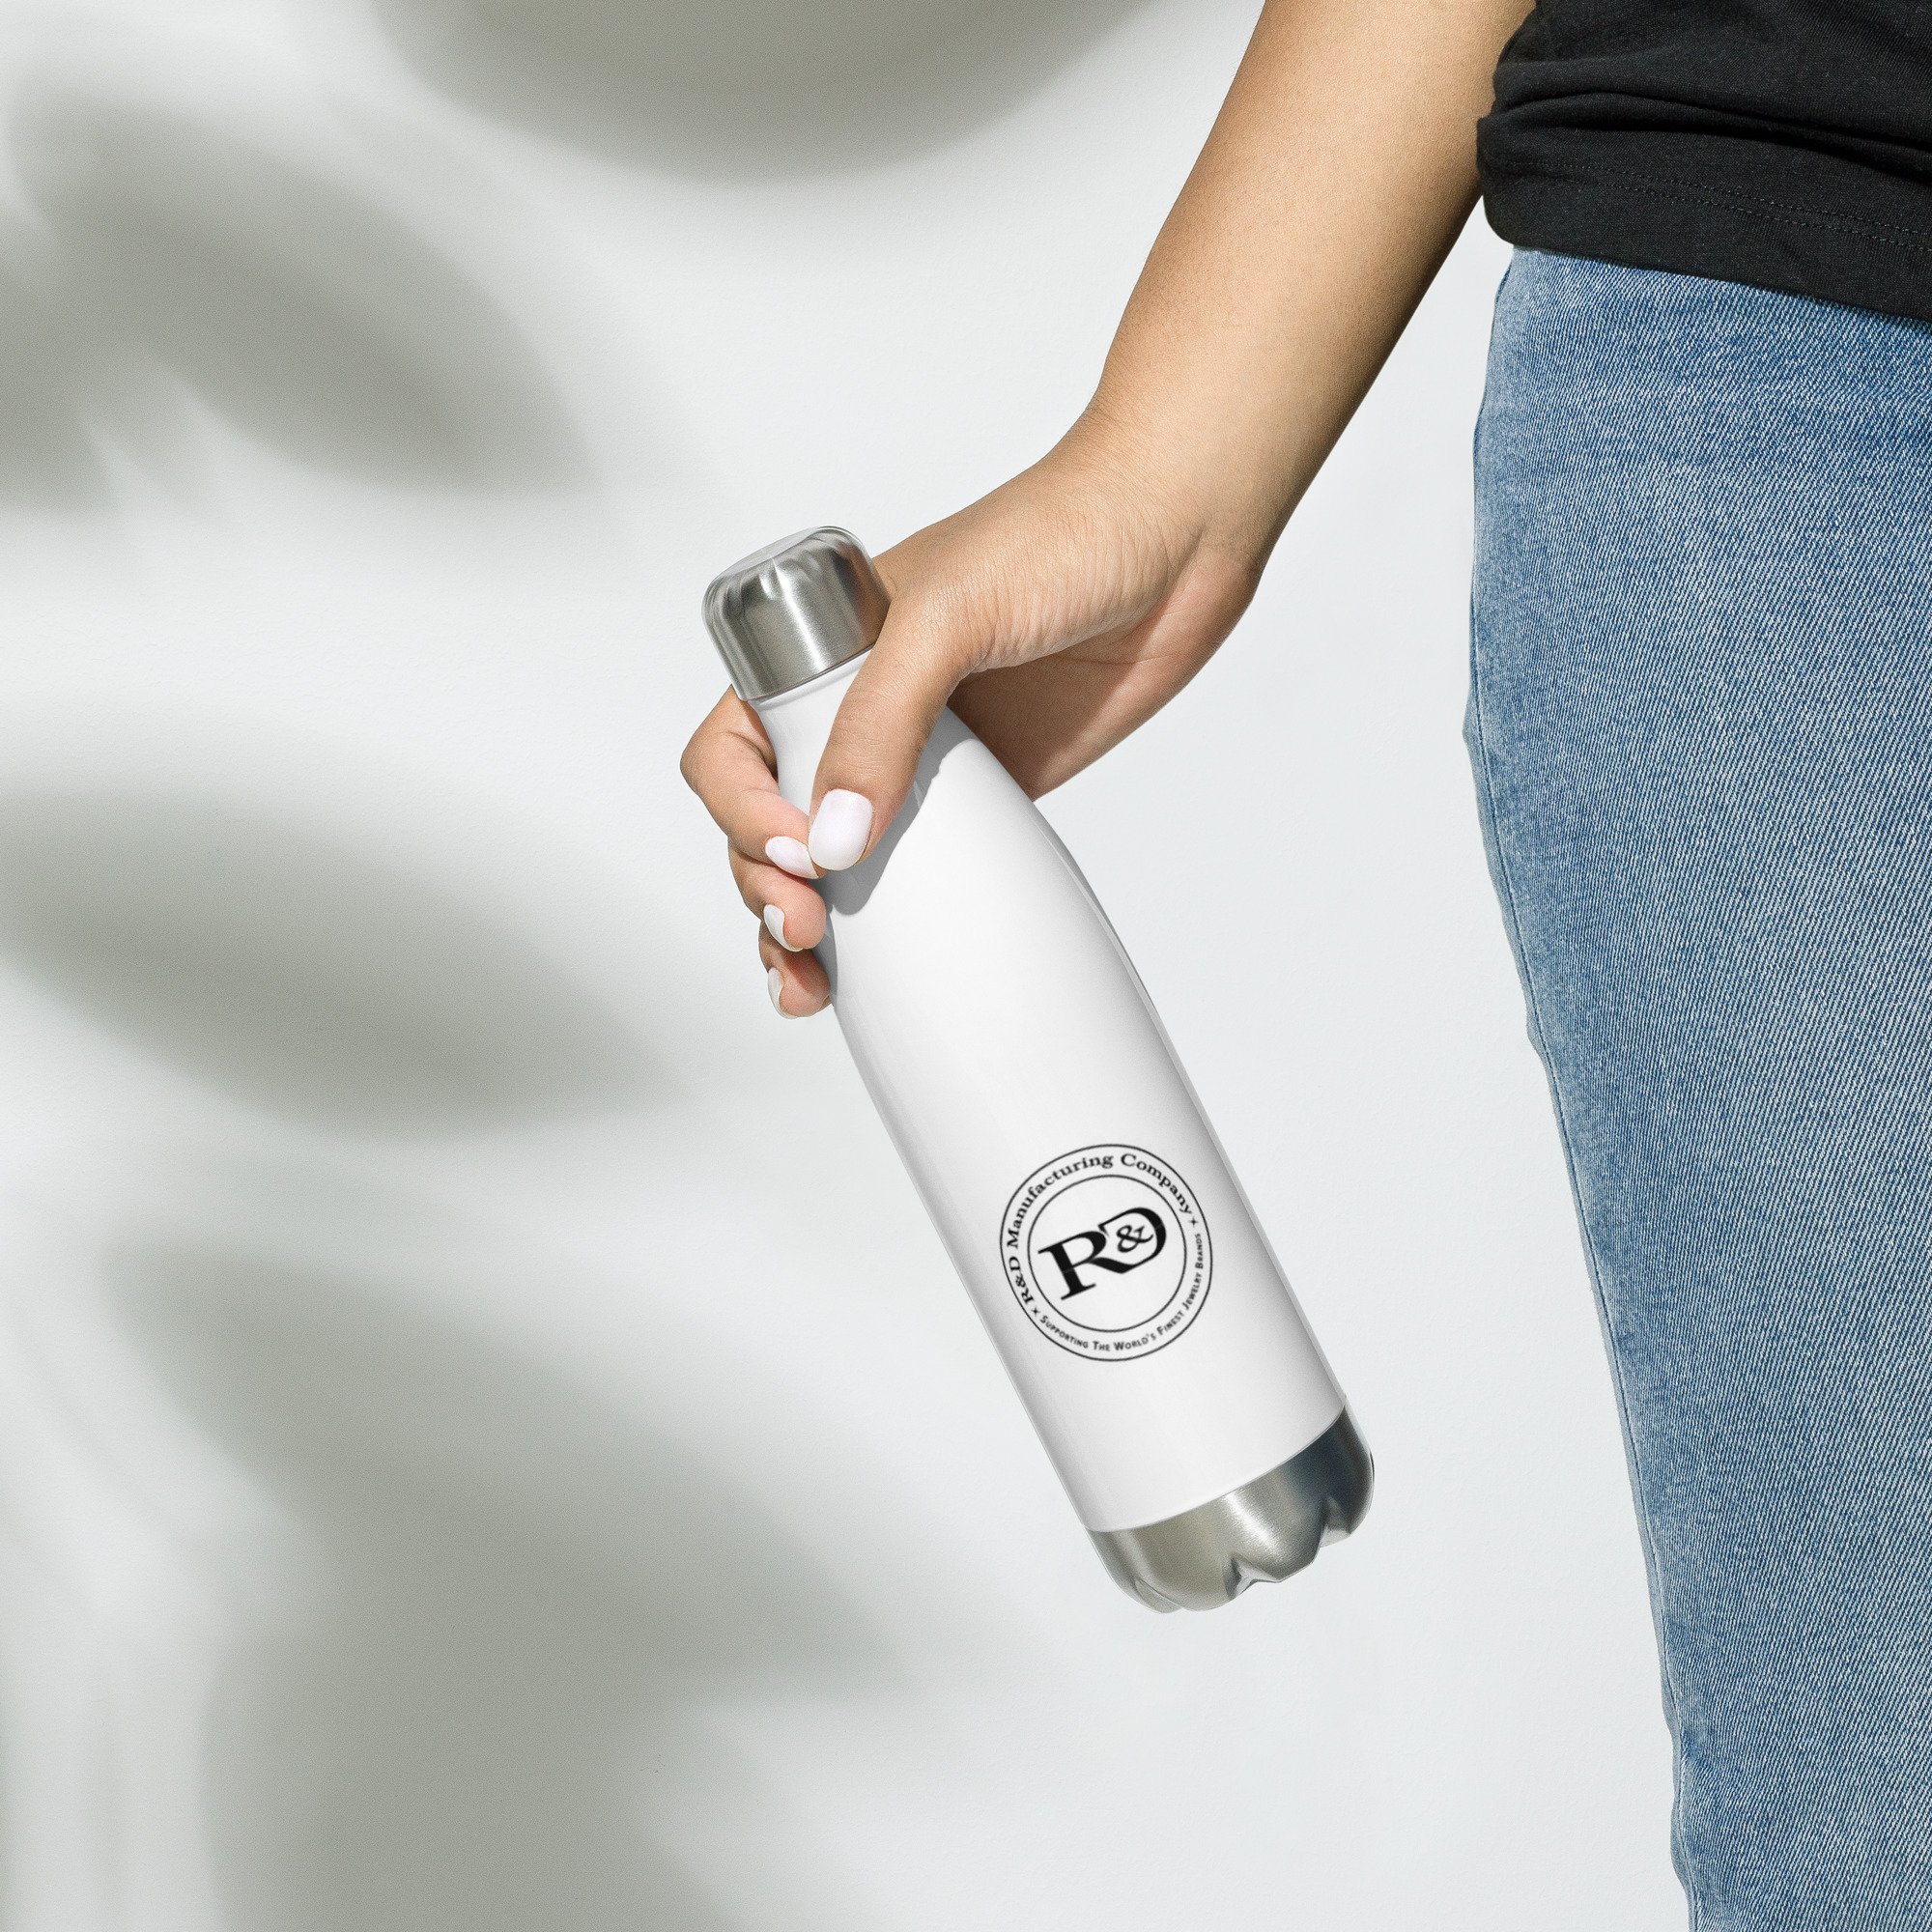 Stainless Steel Water Bottle — R&D MANUFACTURING - Jewelry Manufacturing, CAD, 3D Printing, Casting, Striking, Polishing